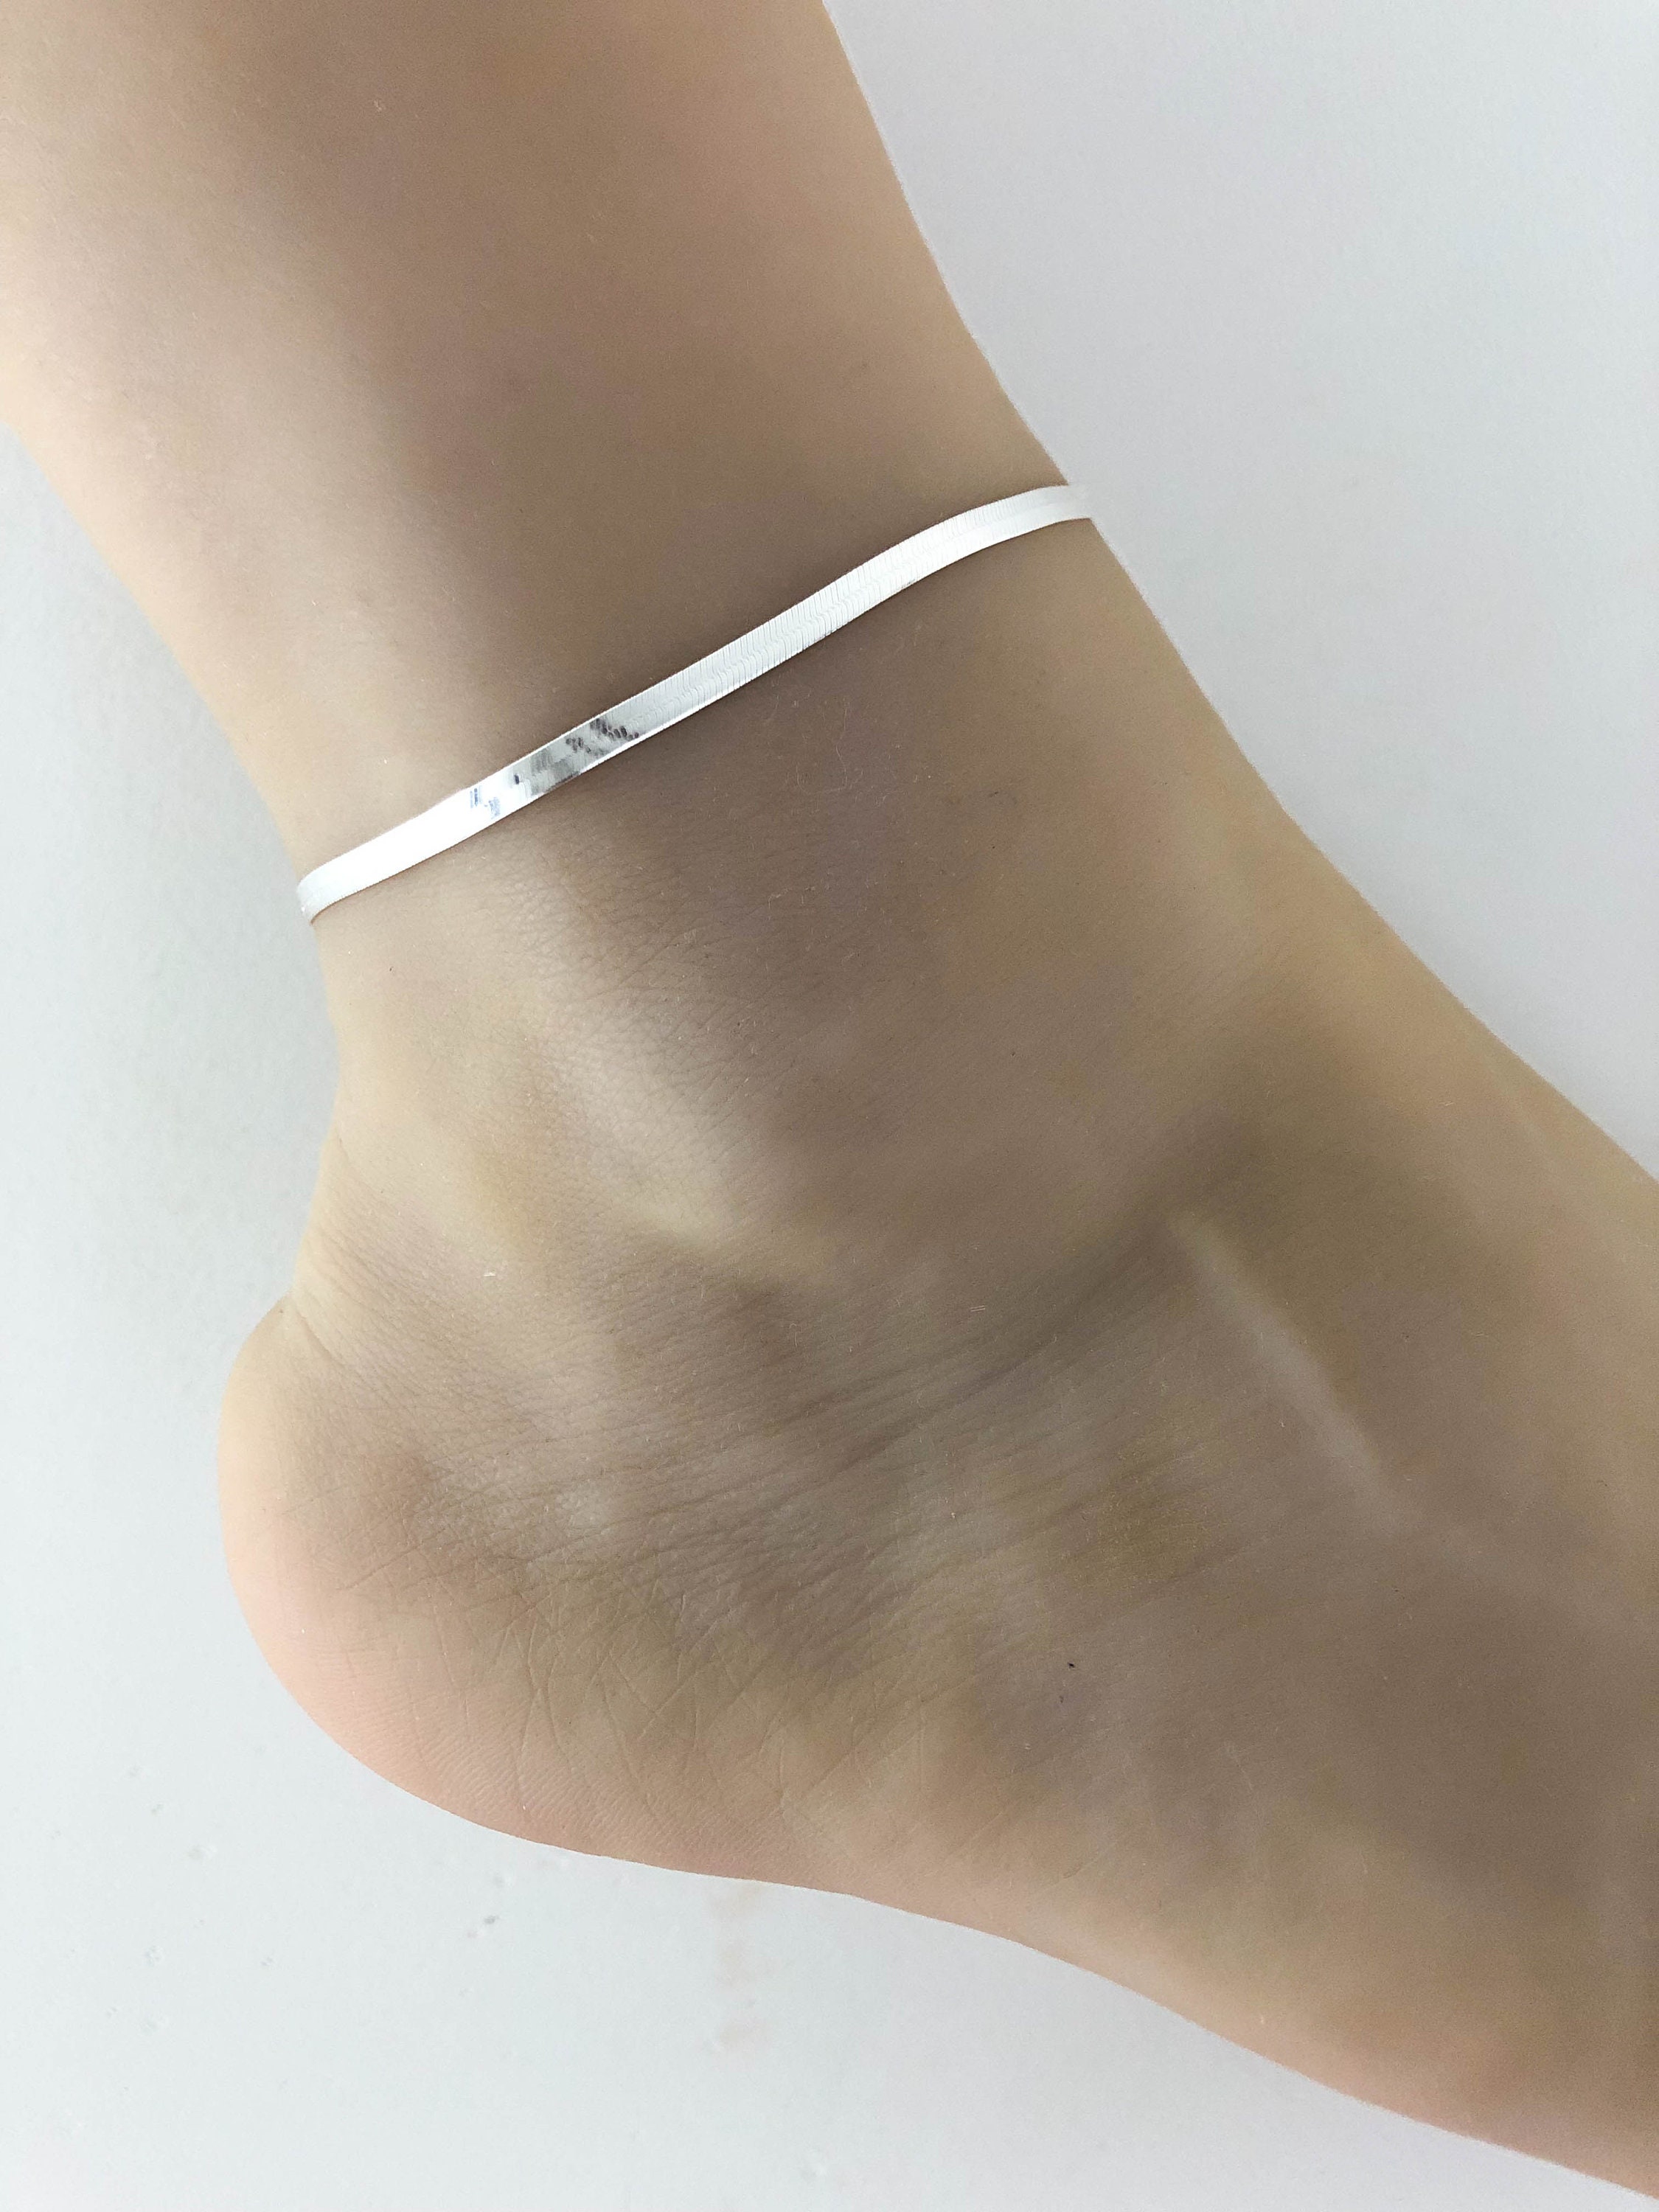 Snake Chain TE Necklace, Anklet, Bracelet - Sterling Silver - Made in Italy